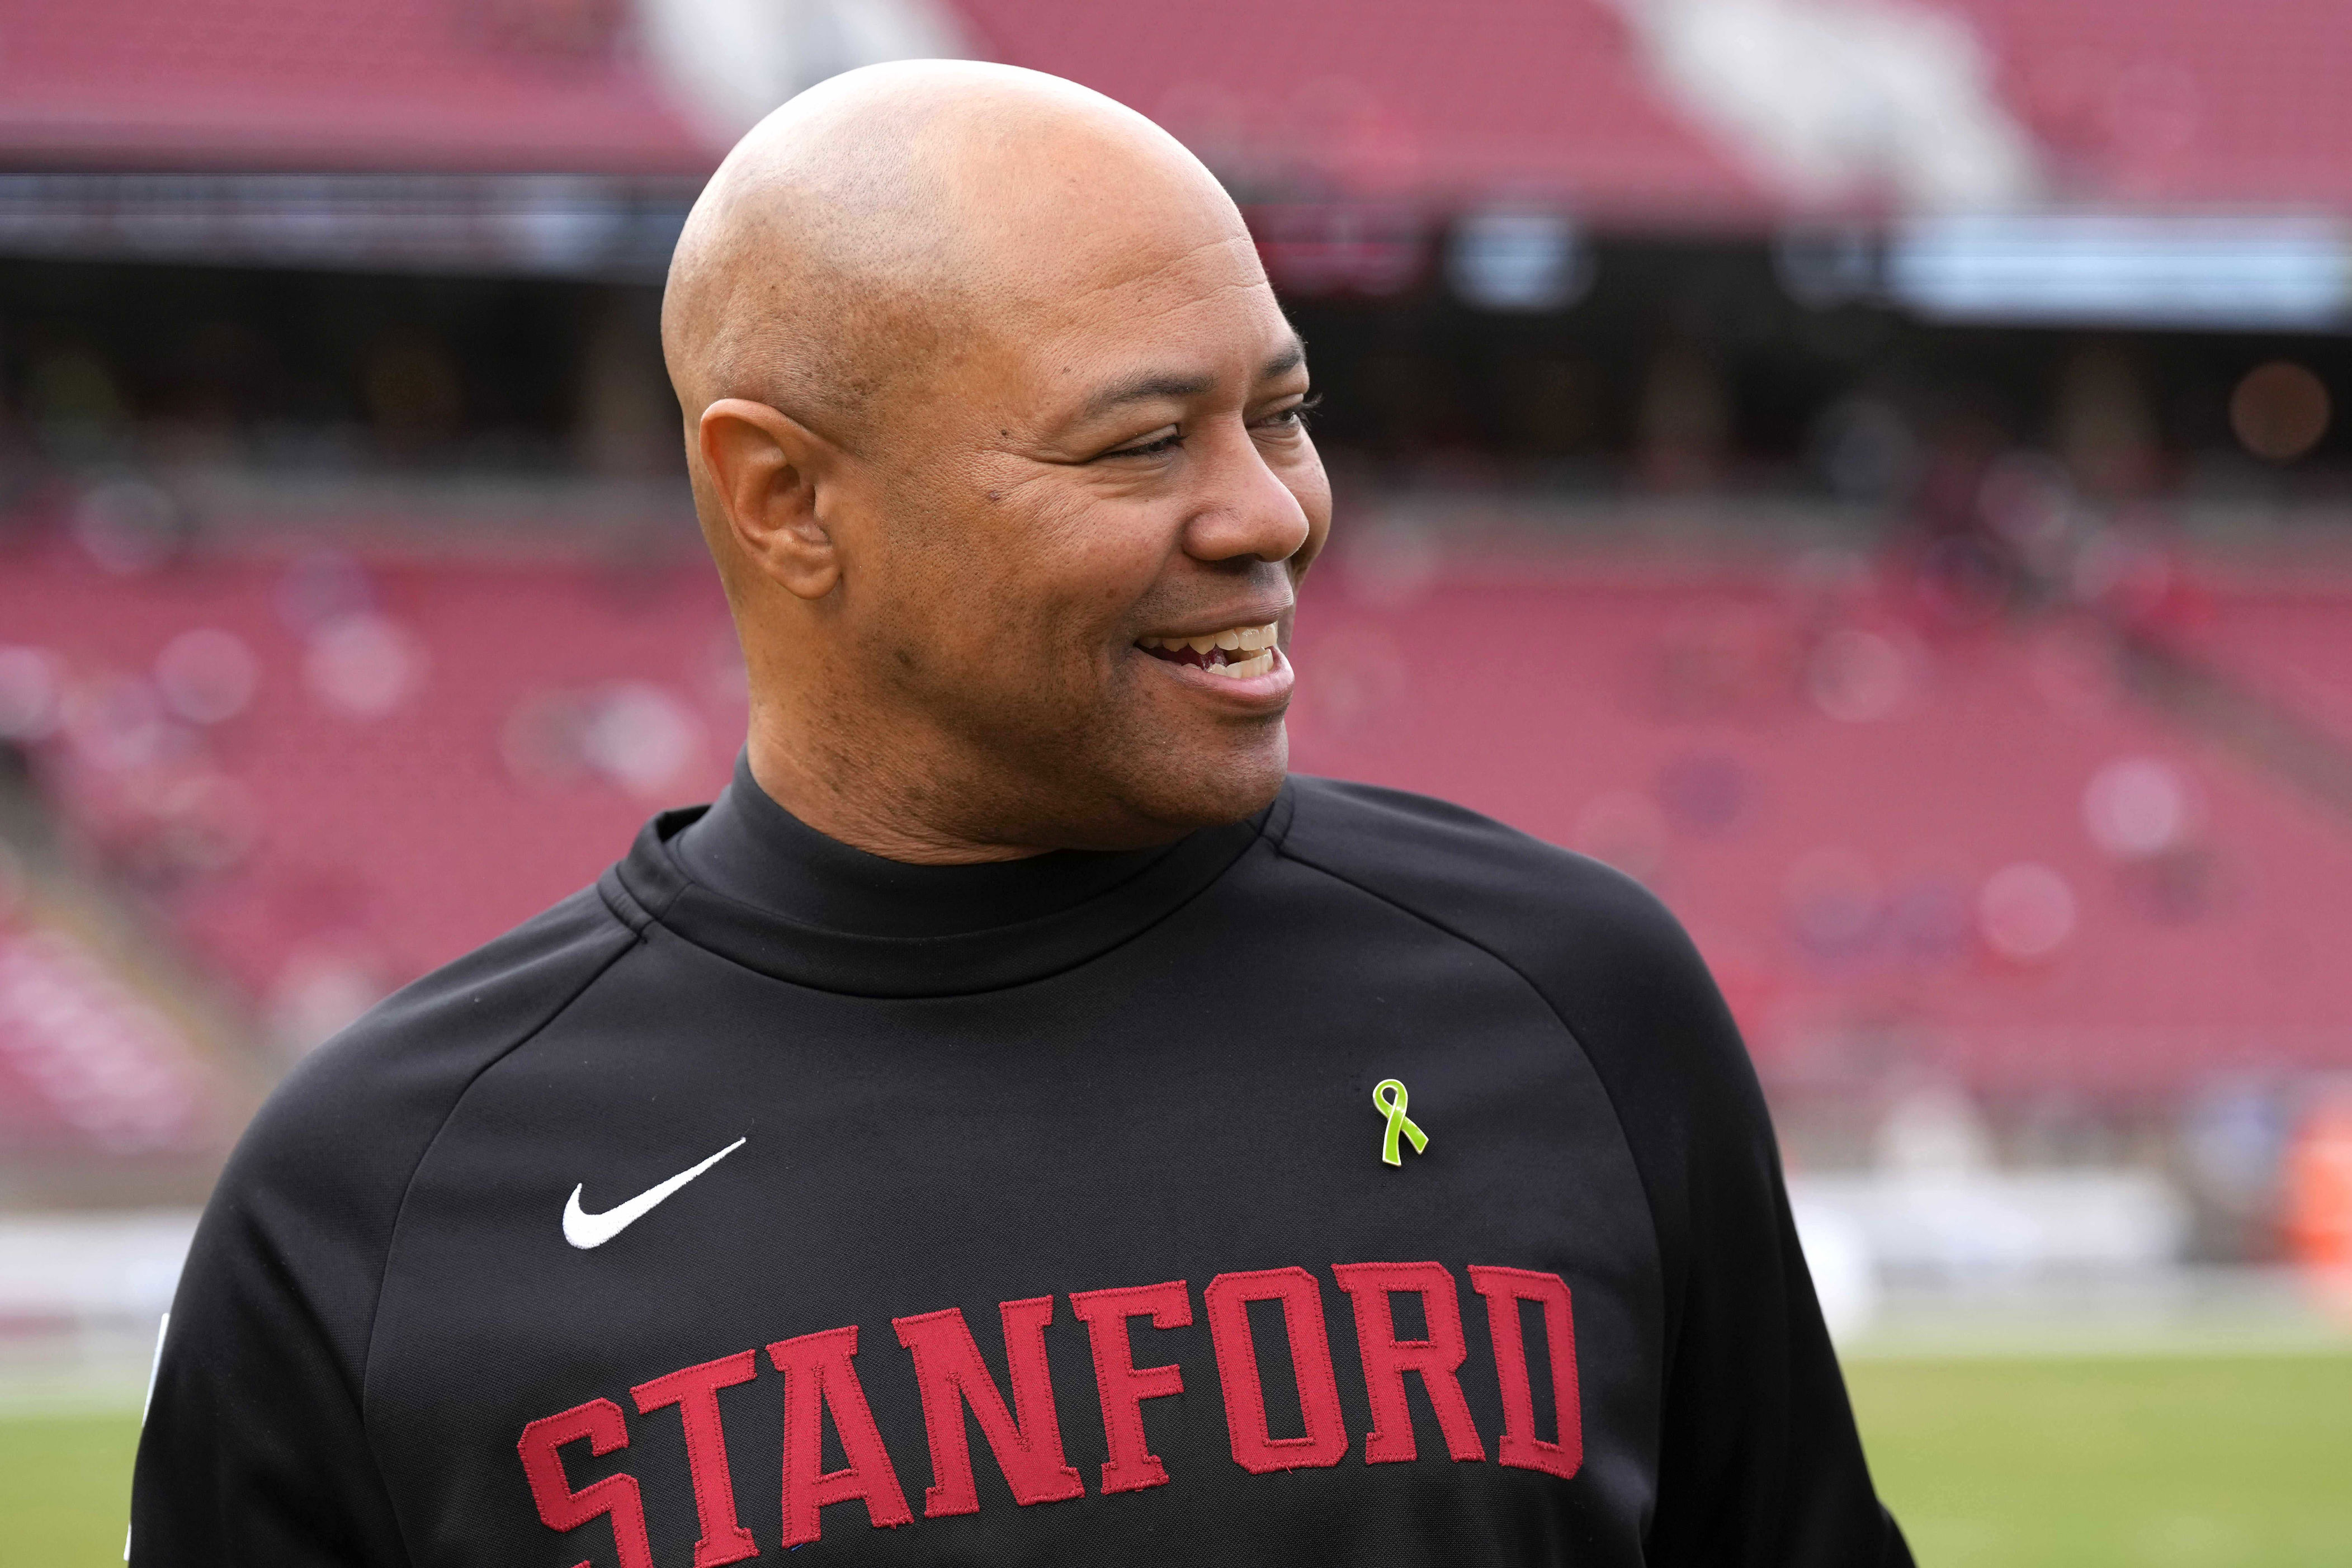 chargers interview former stanford coach david shaw for head coaching vacancy